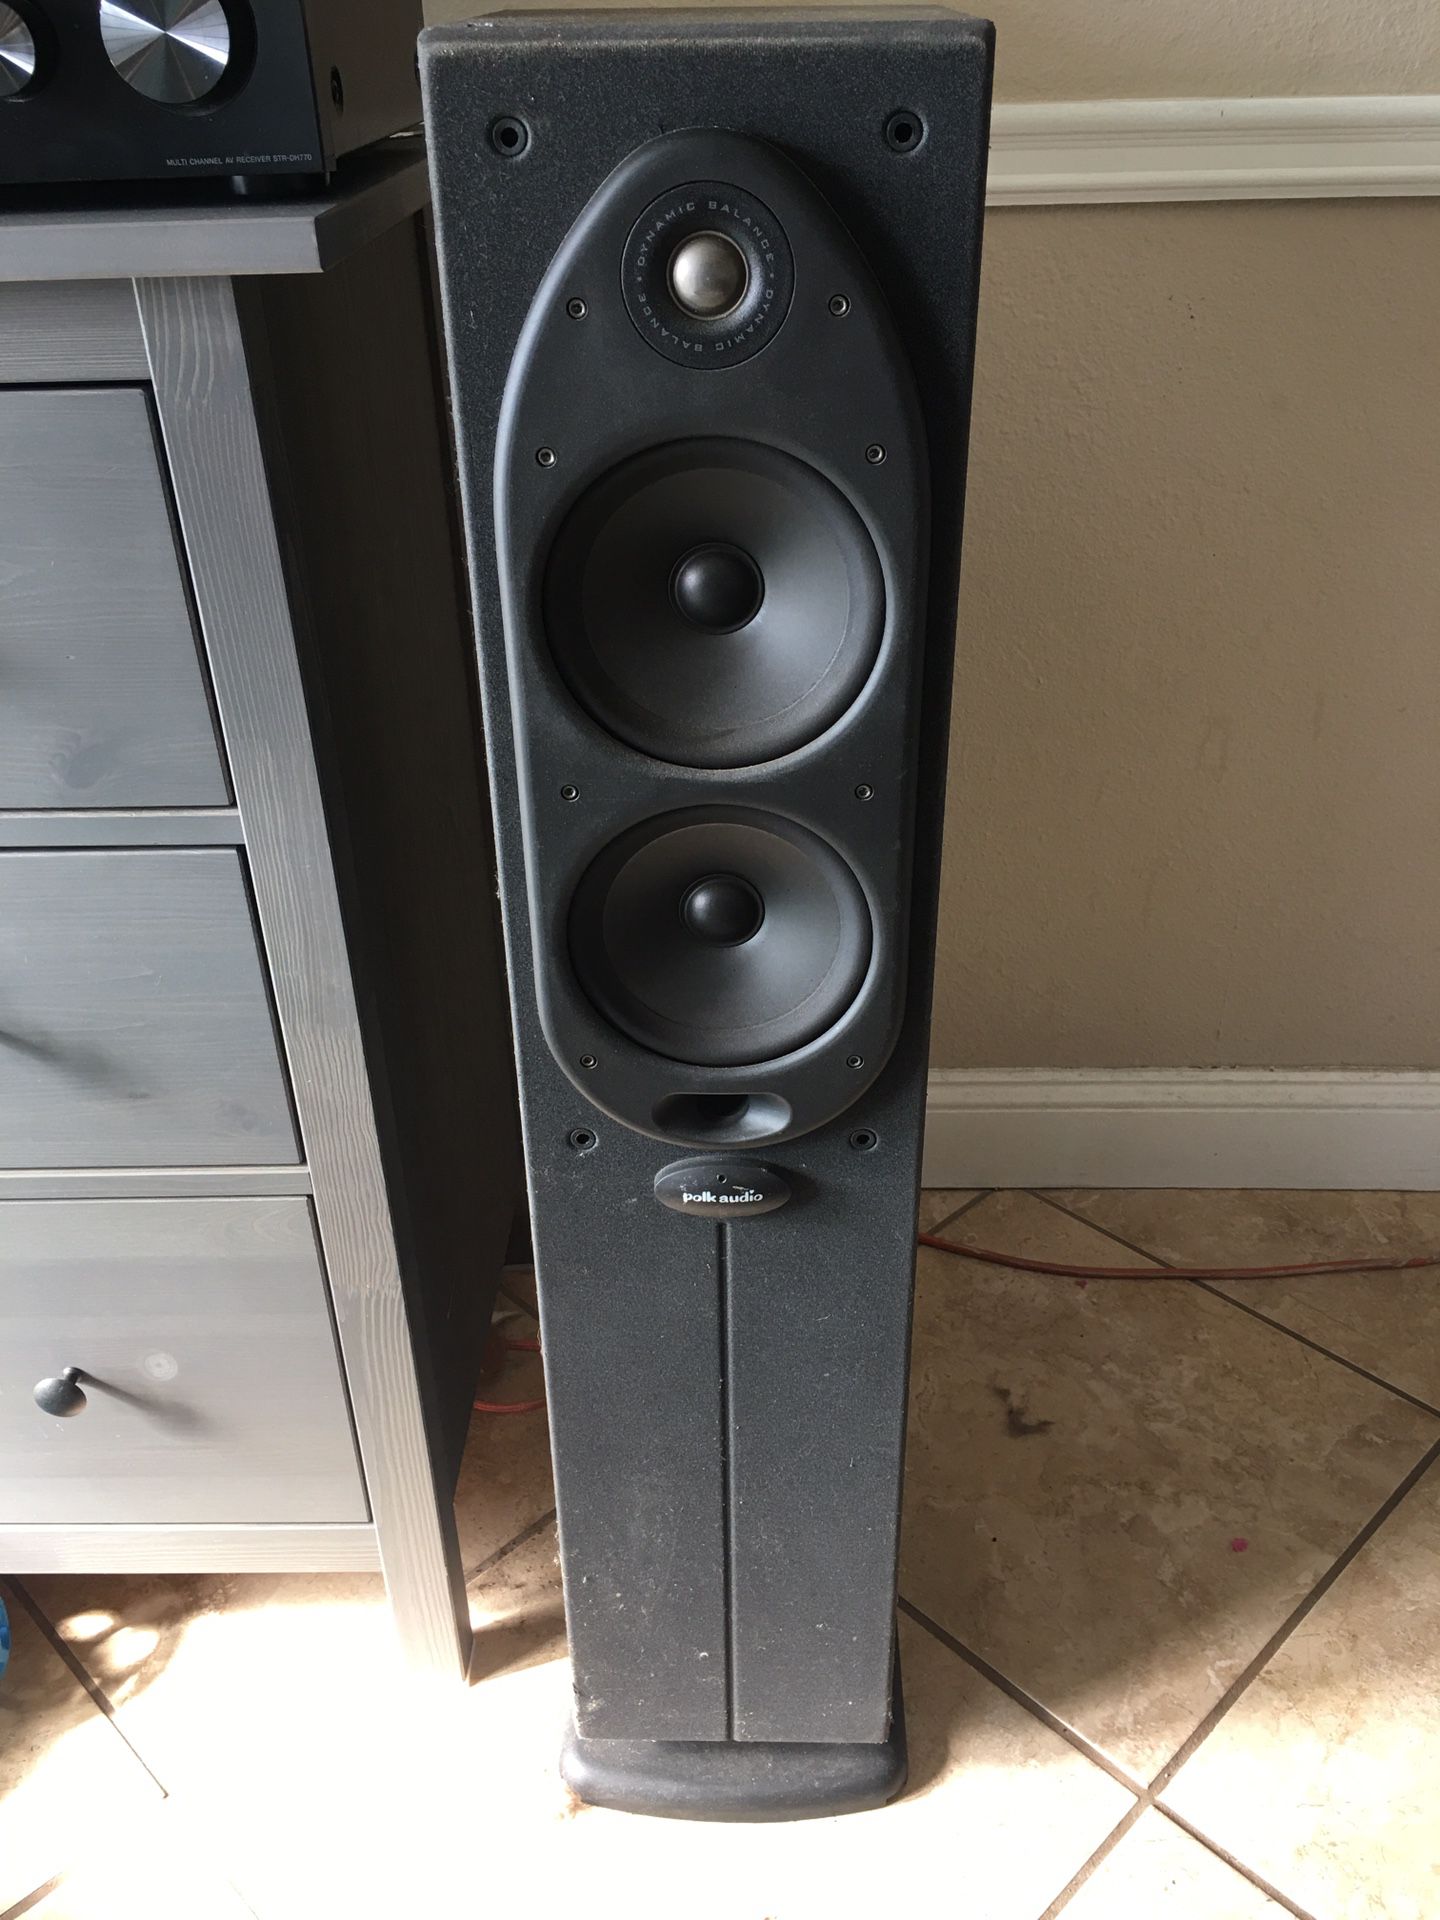 Very nice 4 Polk audio home surround speakers.They work very good and sound really nice.asking $$150obo. Ora possible trade let me know what you have.